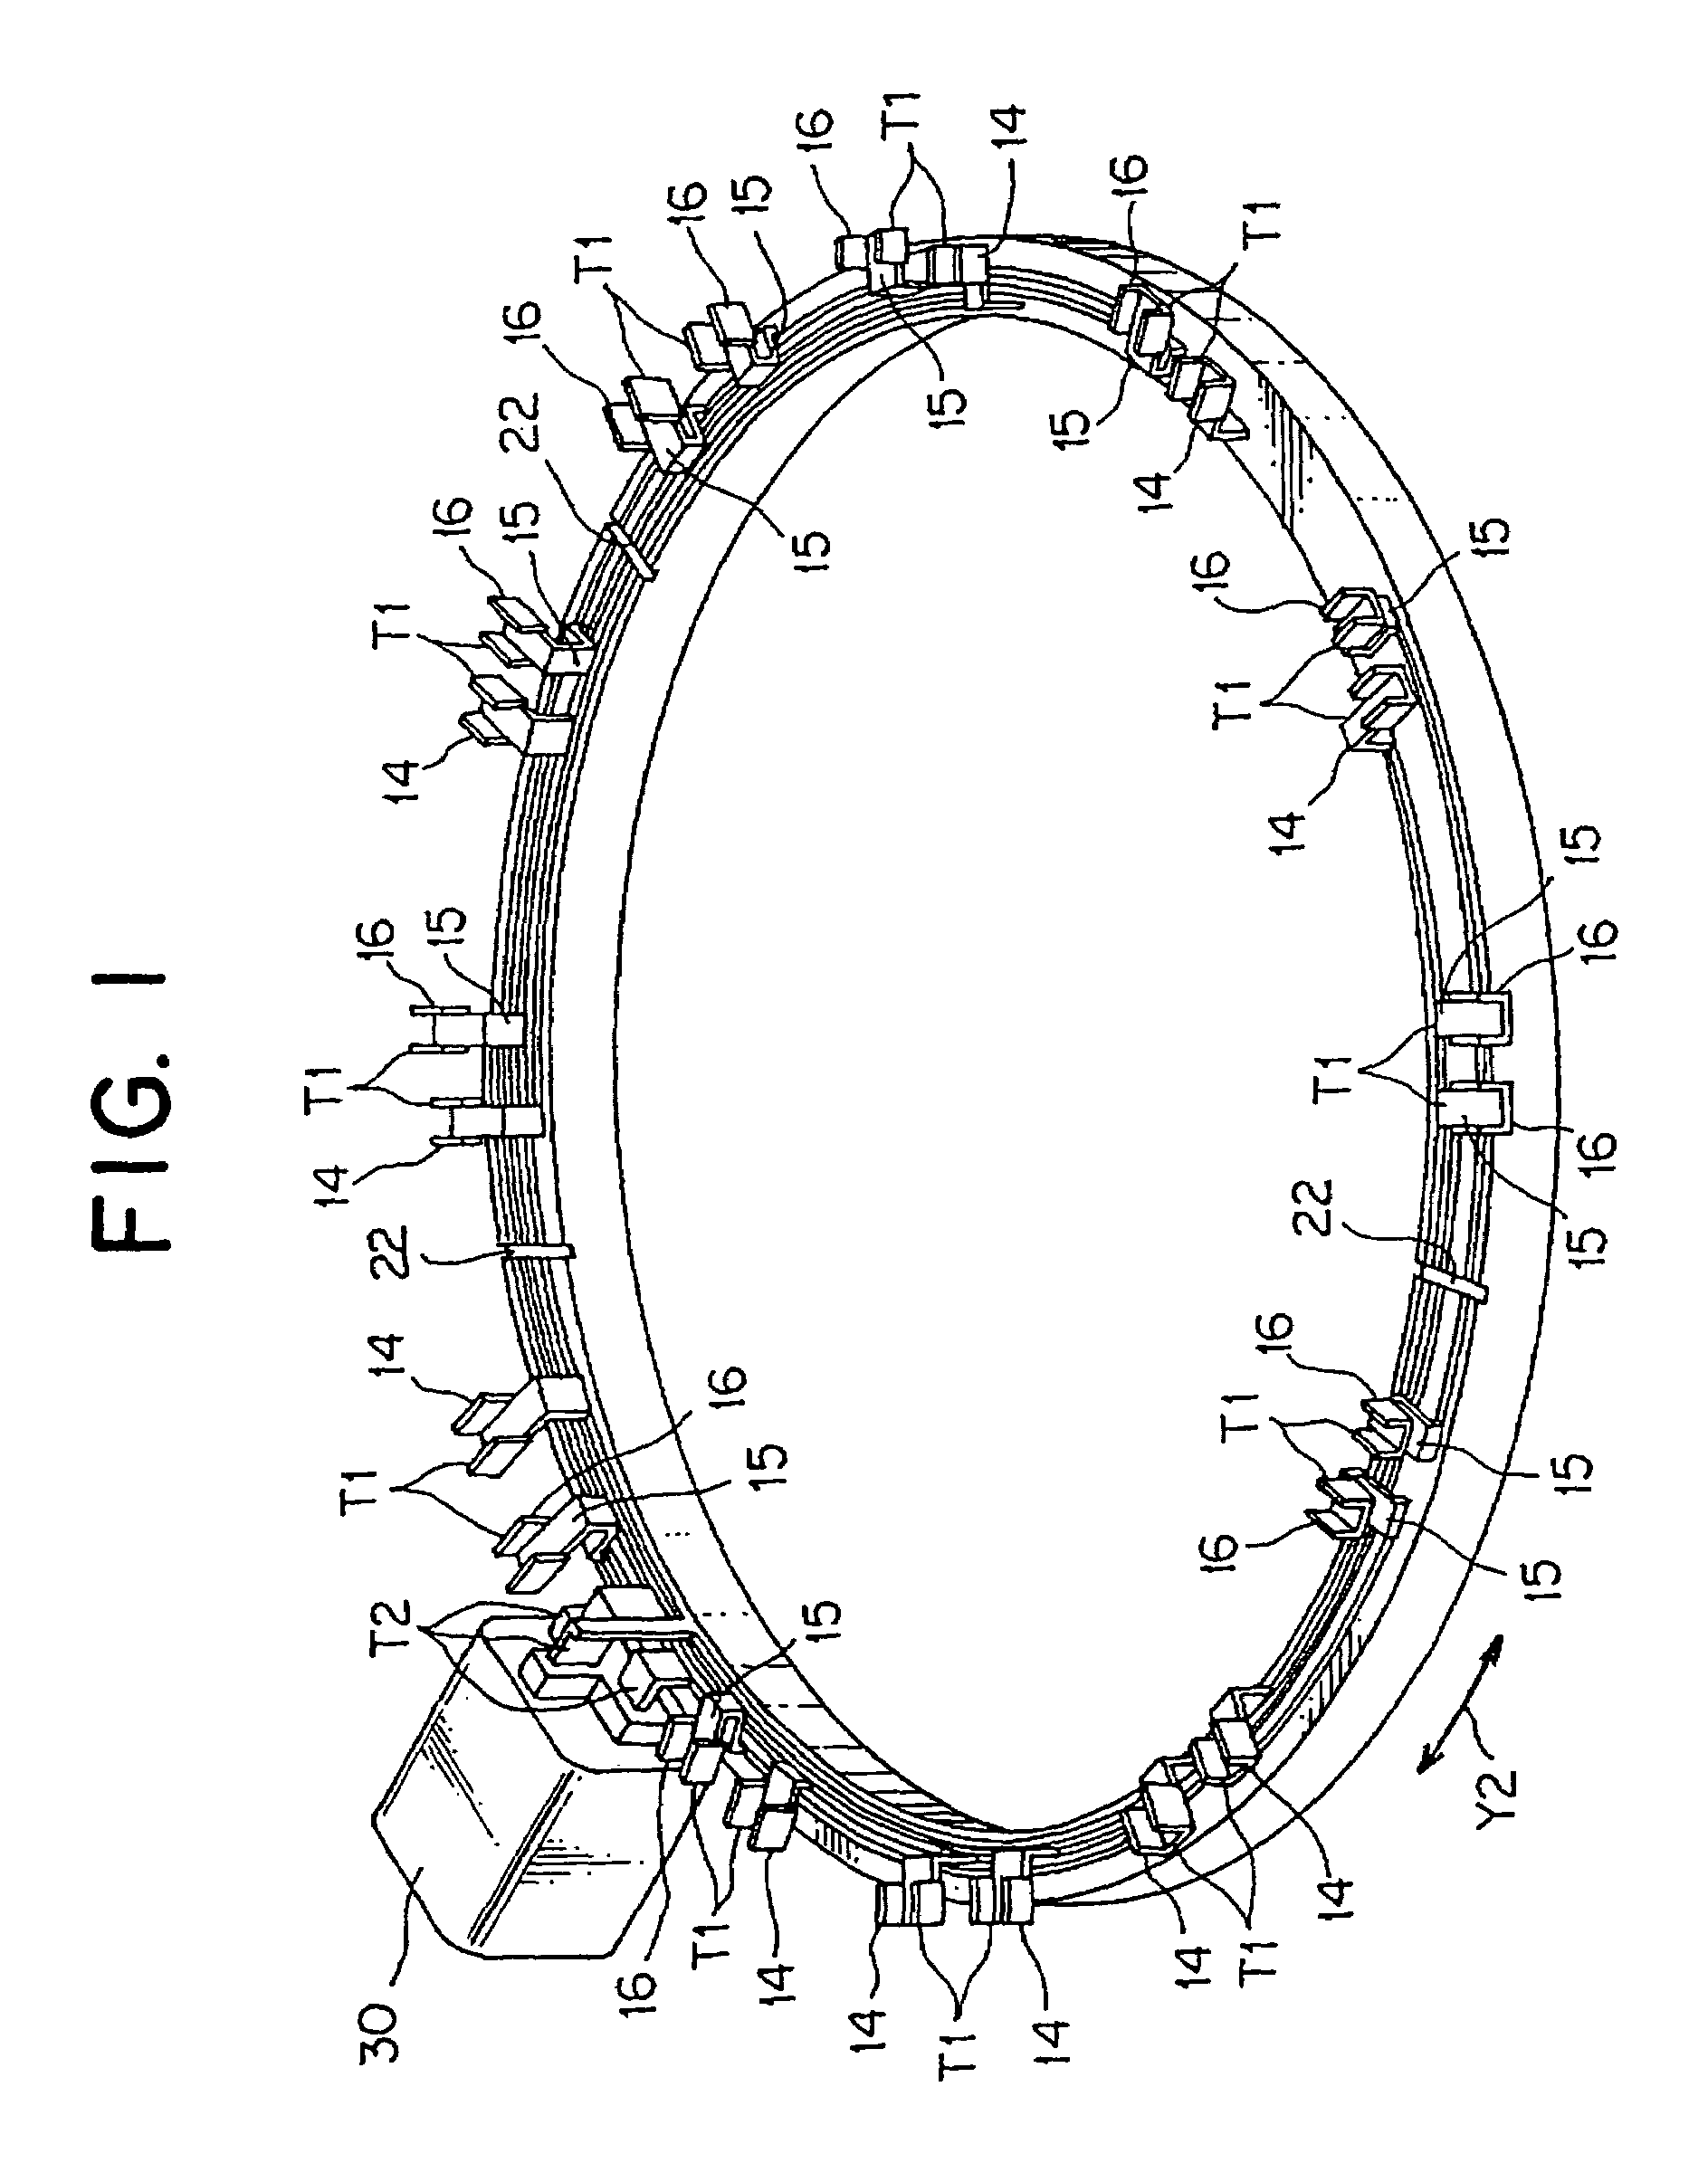 Electric power distribution device